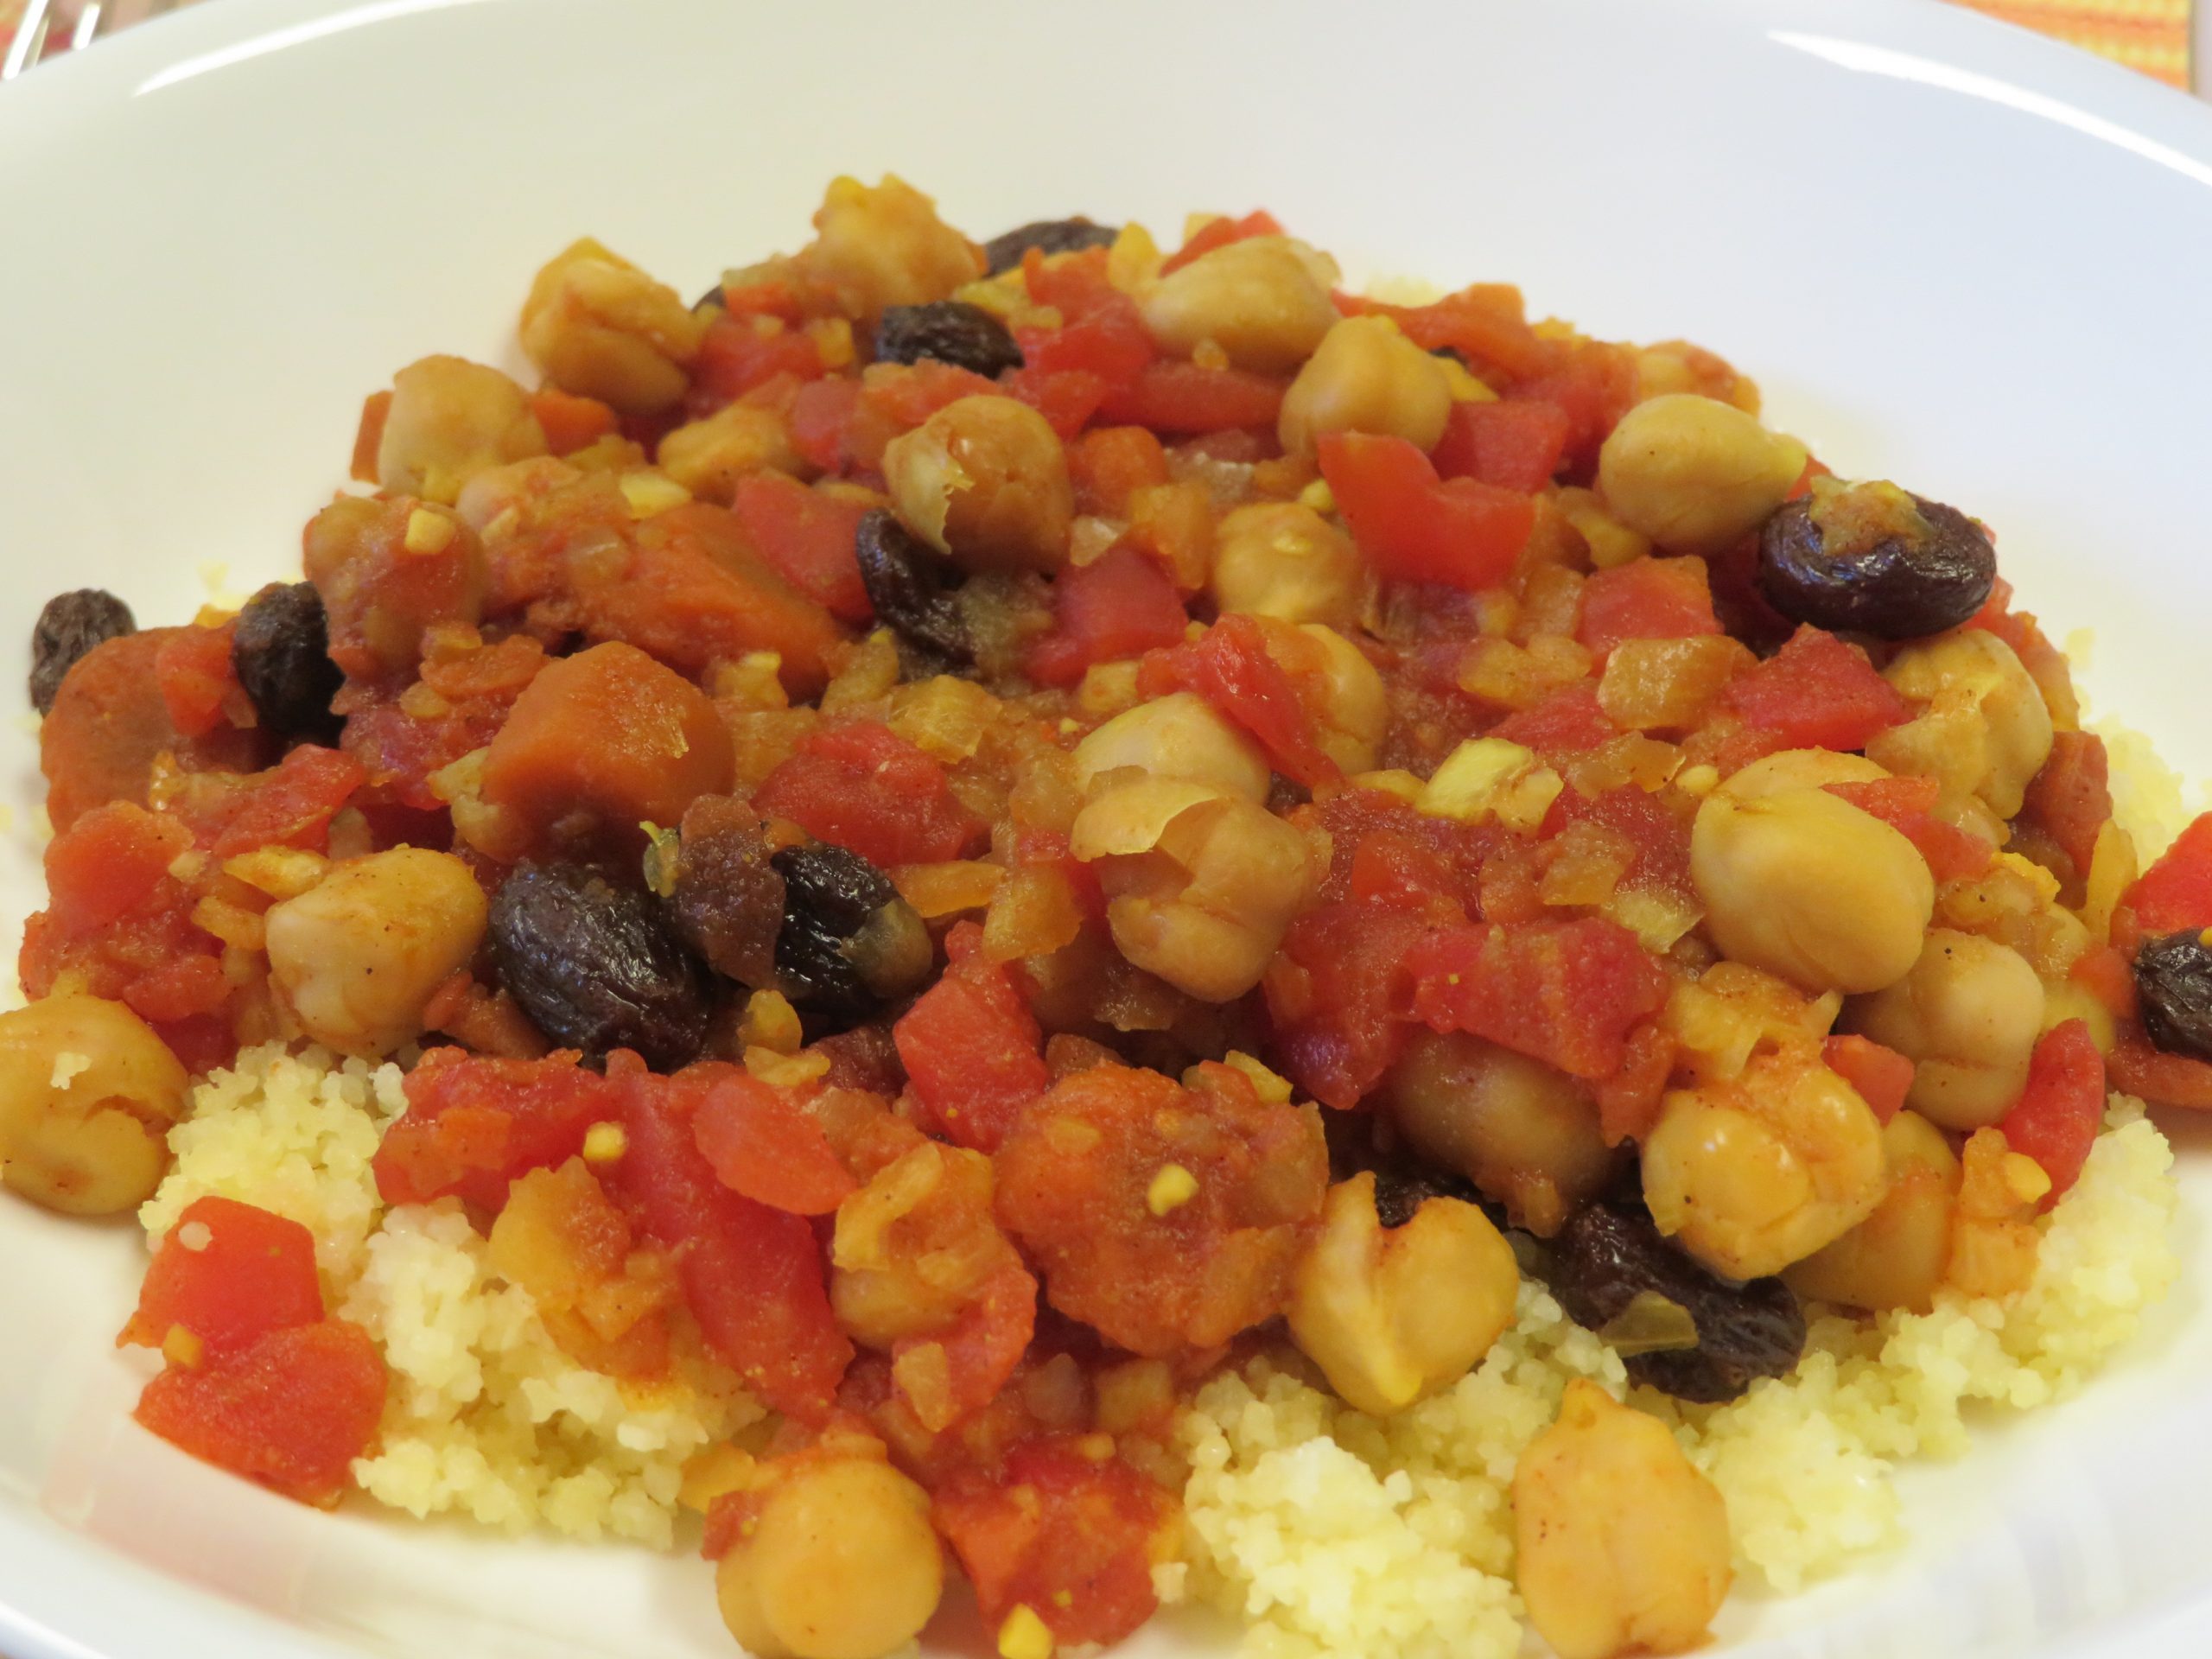 Chickpea Tajine over couscous in a bowl